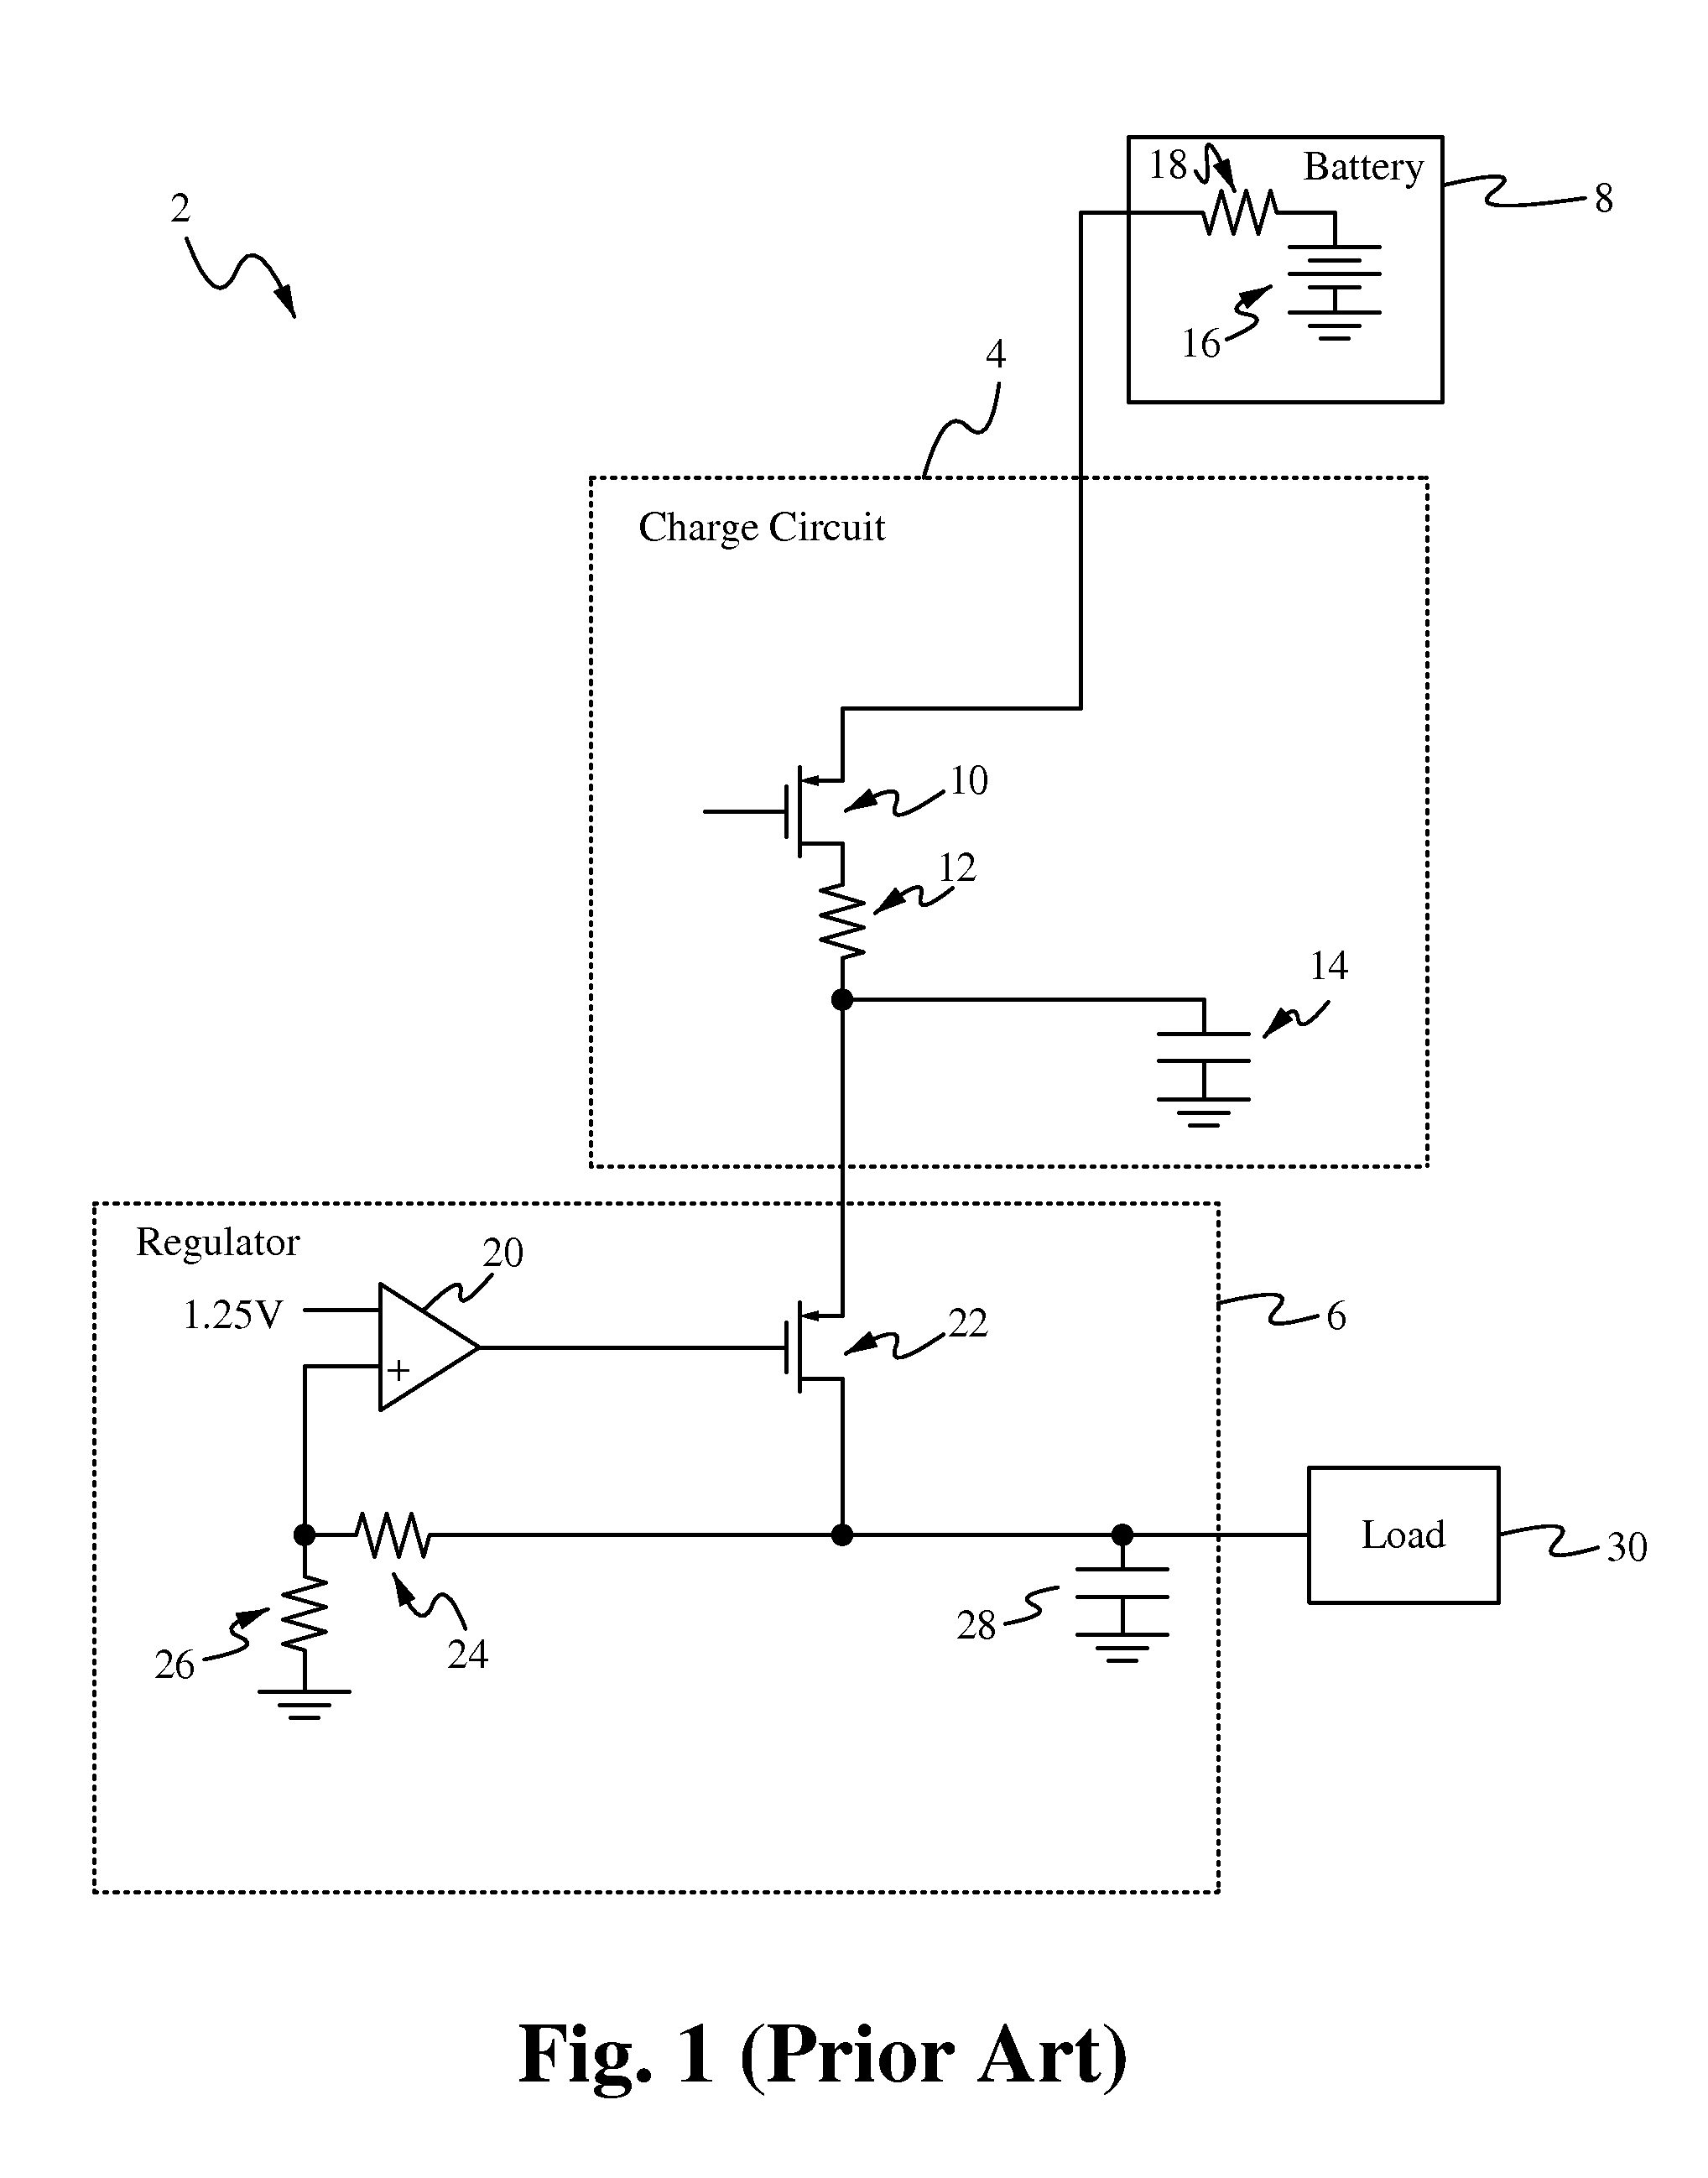 Circuit topology for regulating power from low capacity battery cells